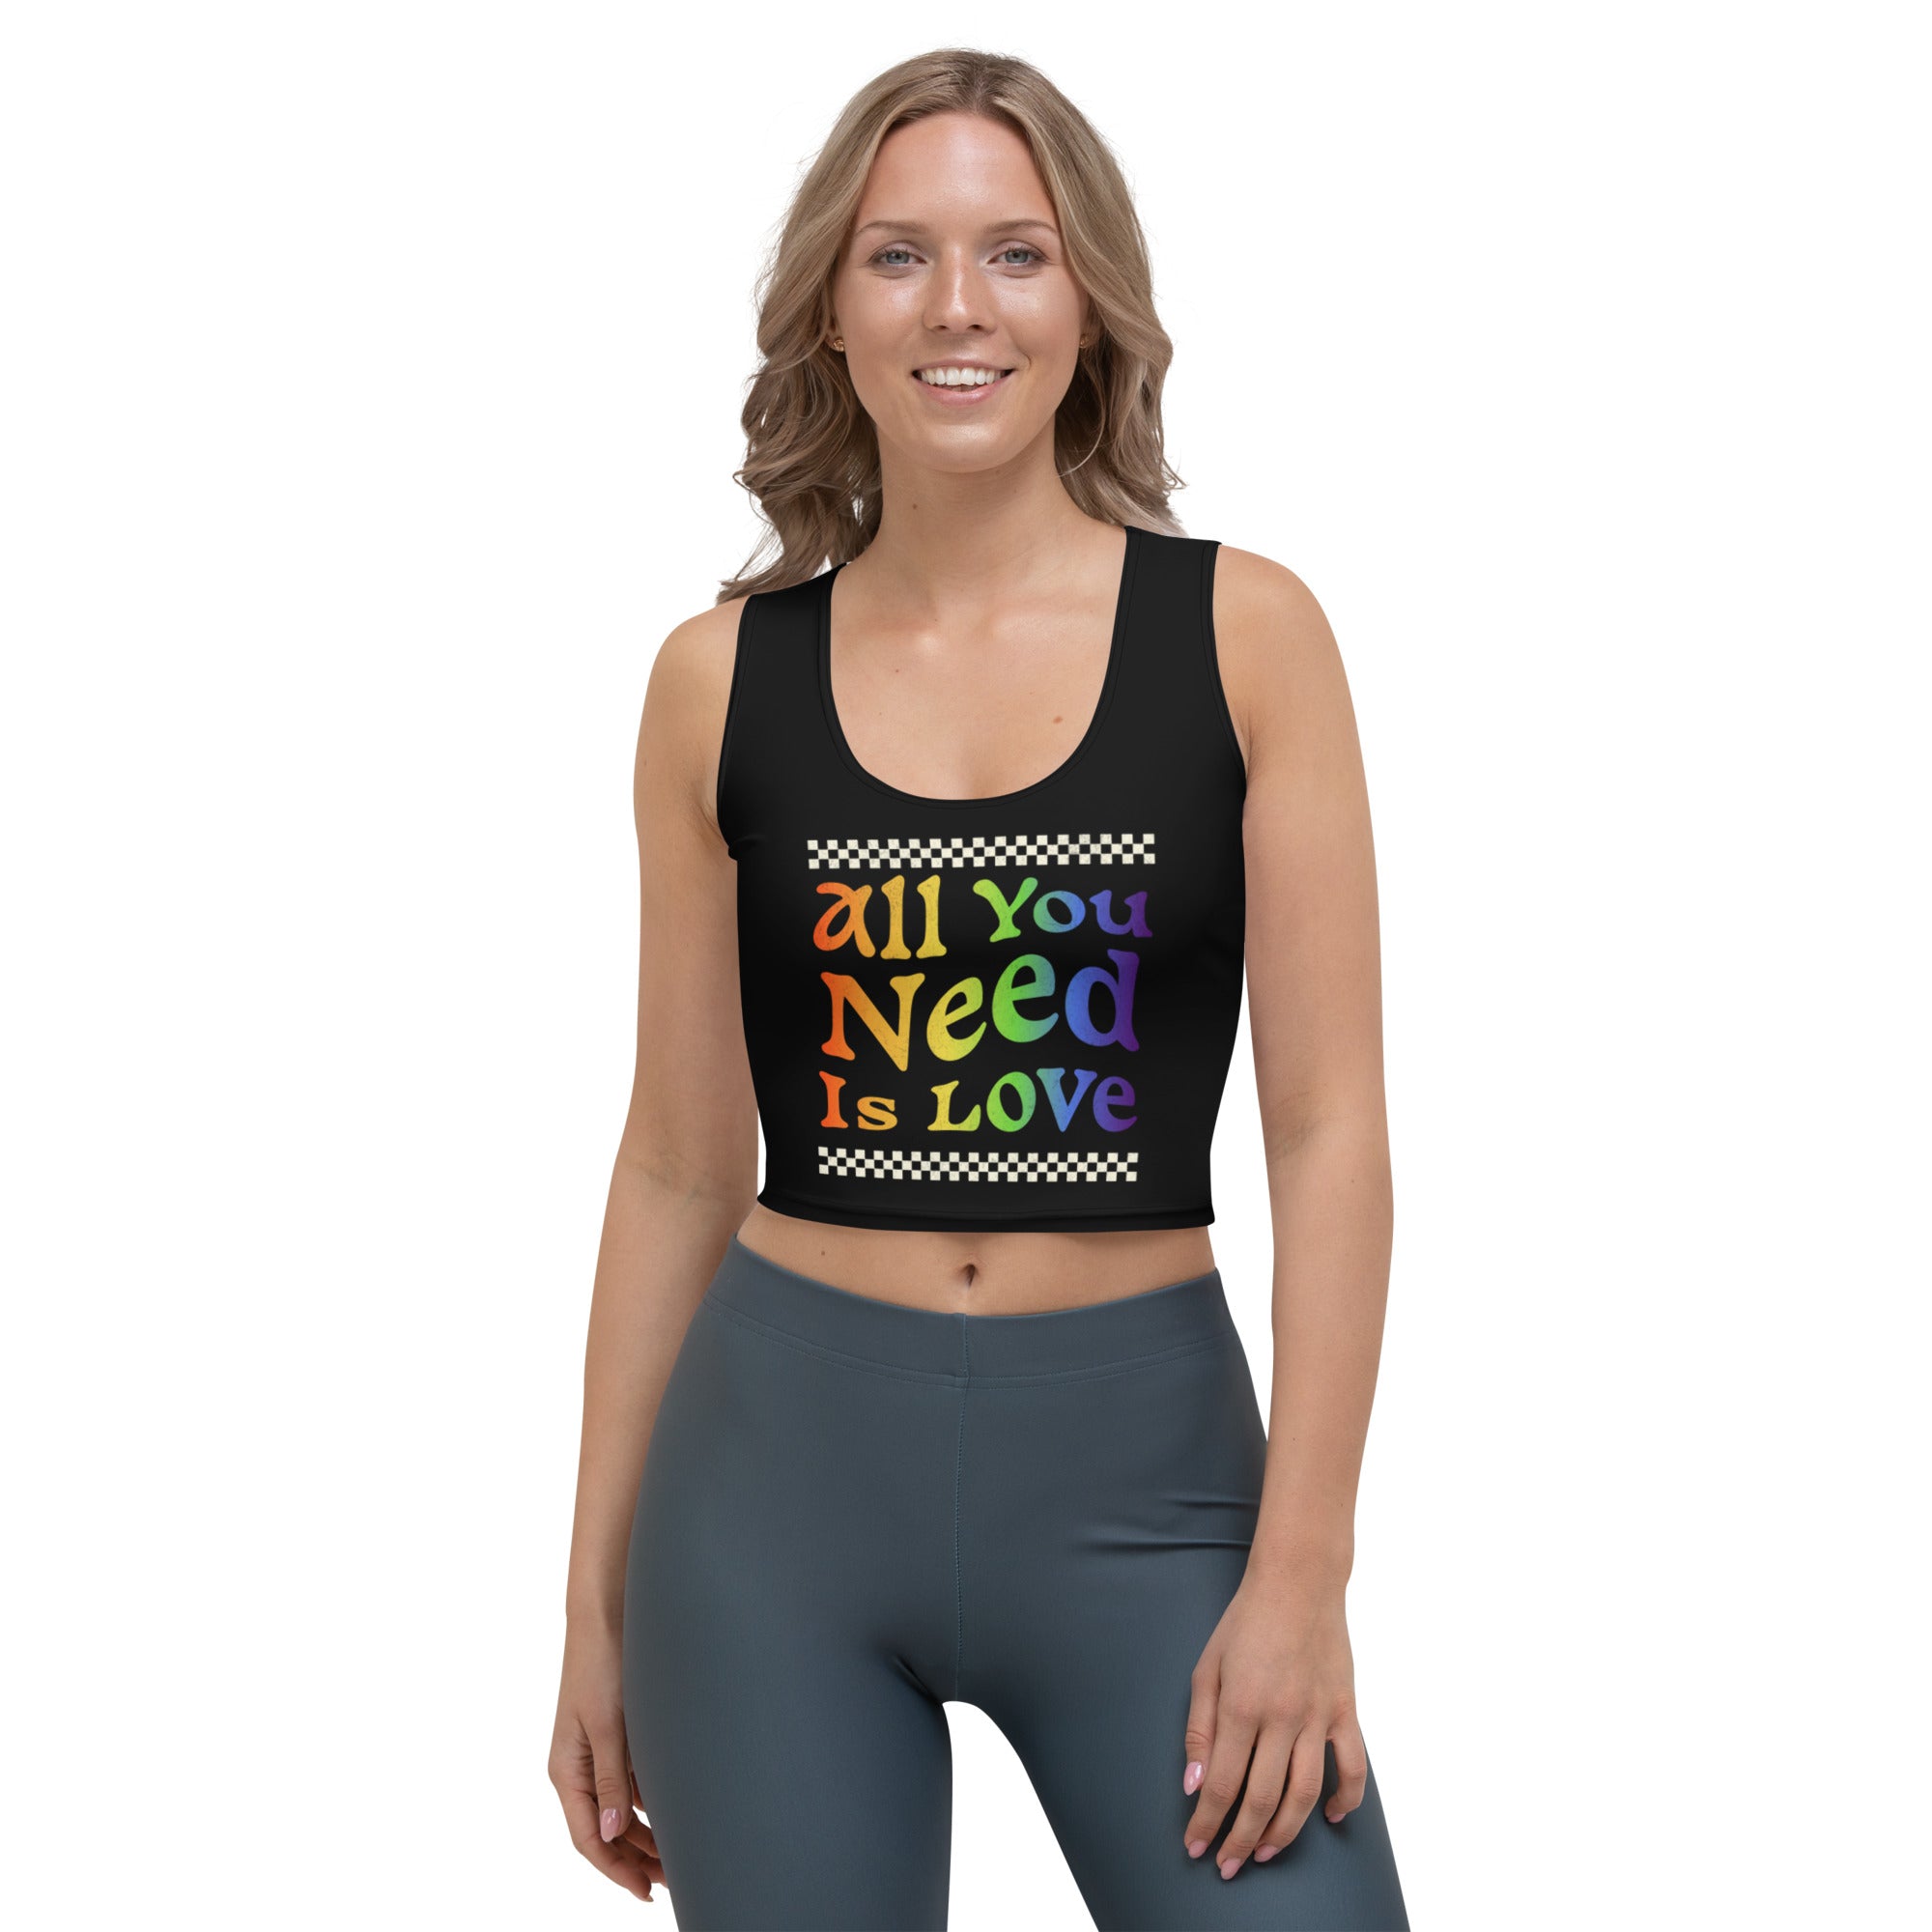 All You Need Is Love Crop Top